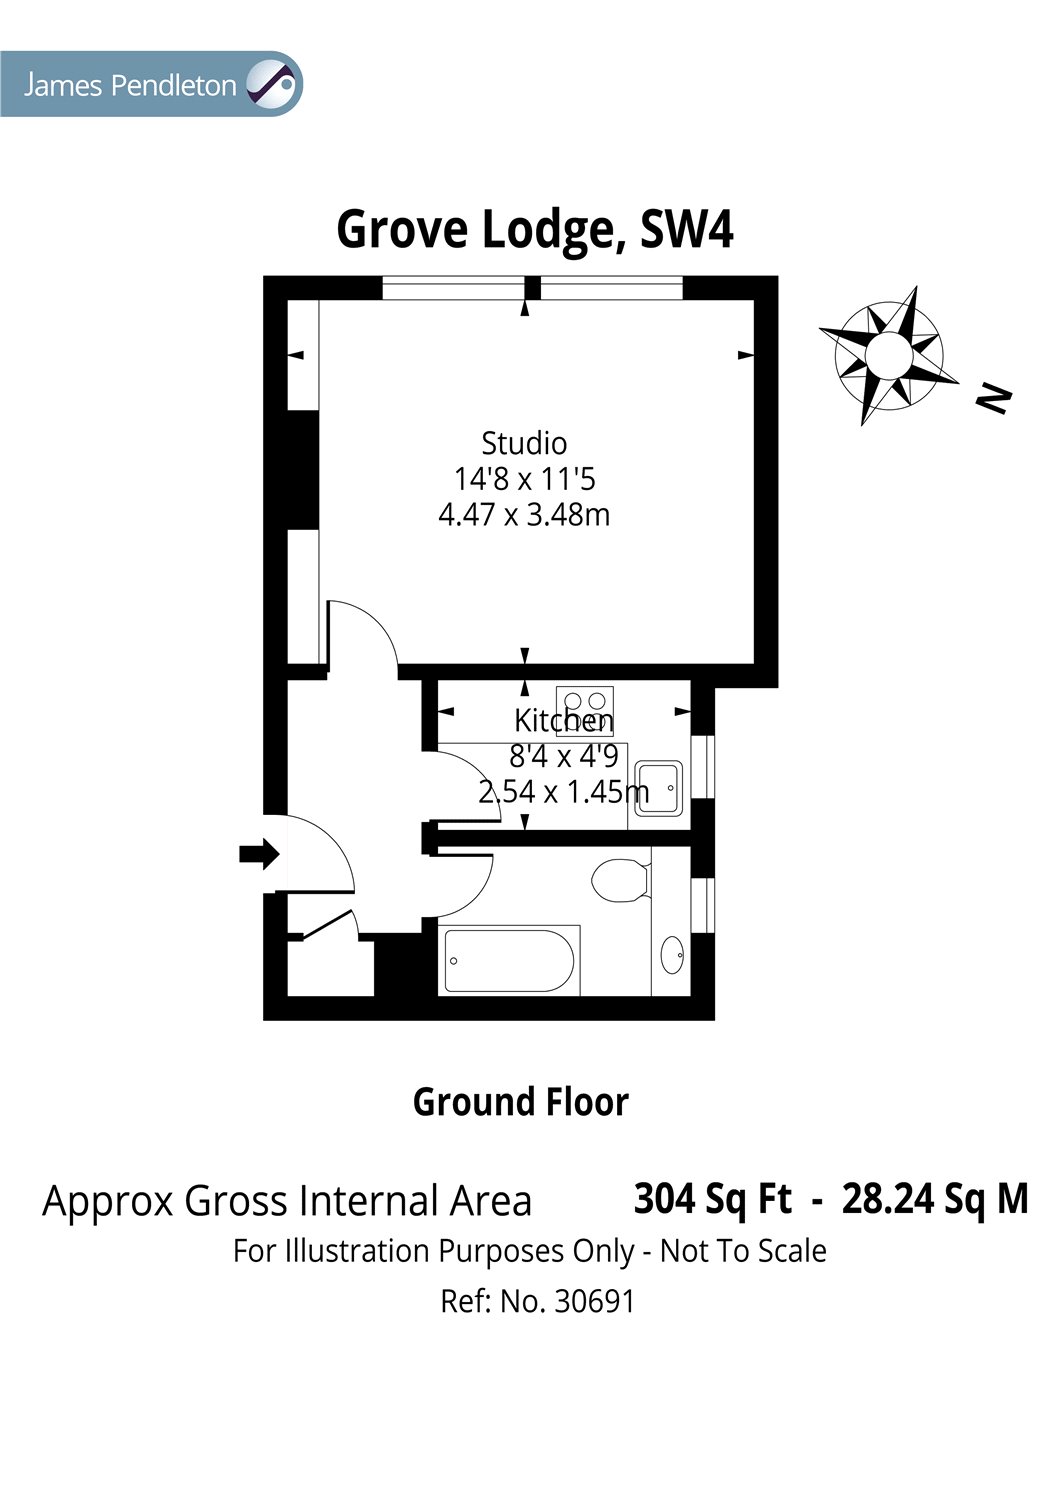 1 Bedrooms Flat to rent in Grove Lodge, Crescent Lodge, Clapham SW4